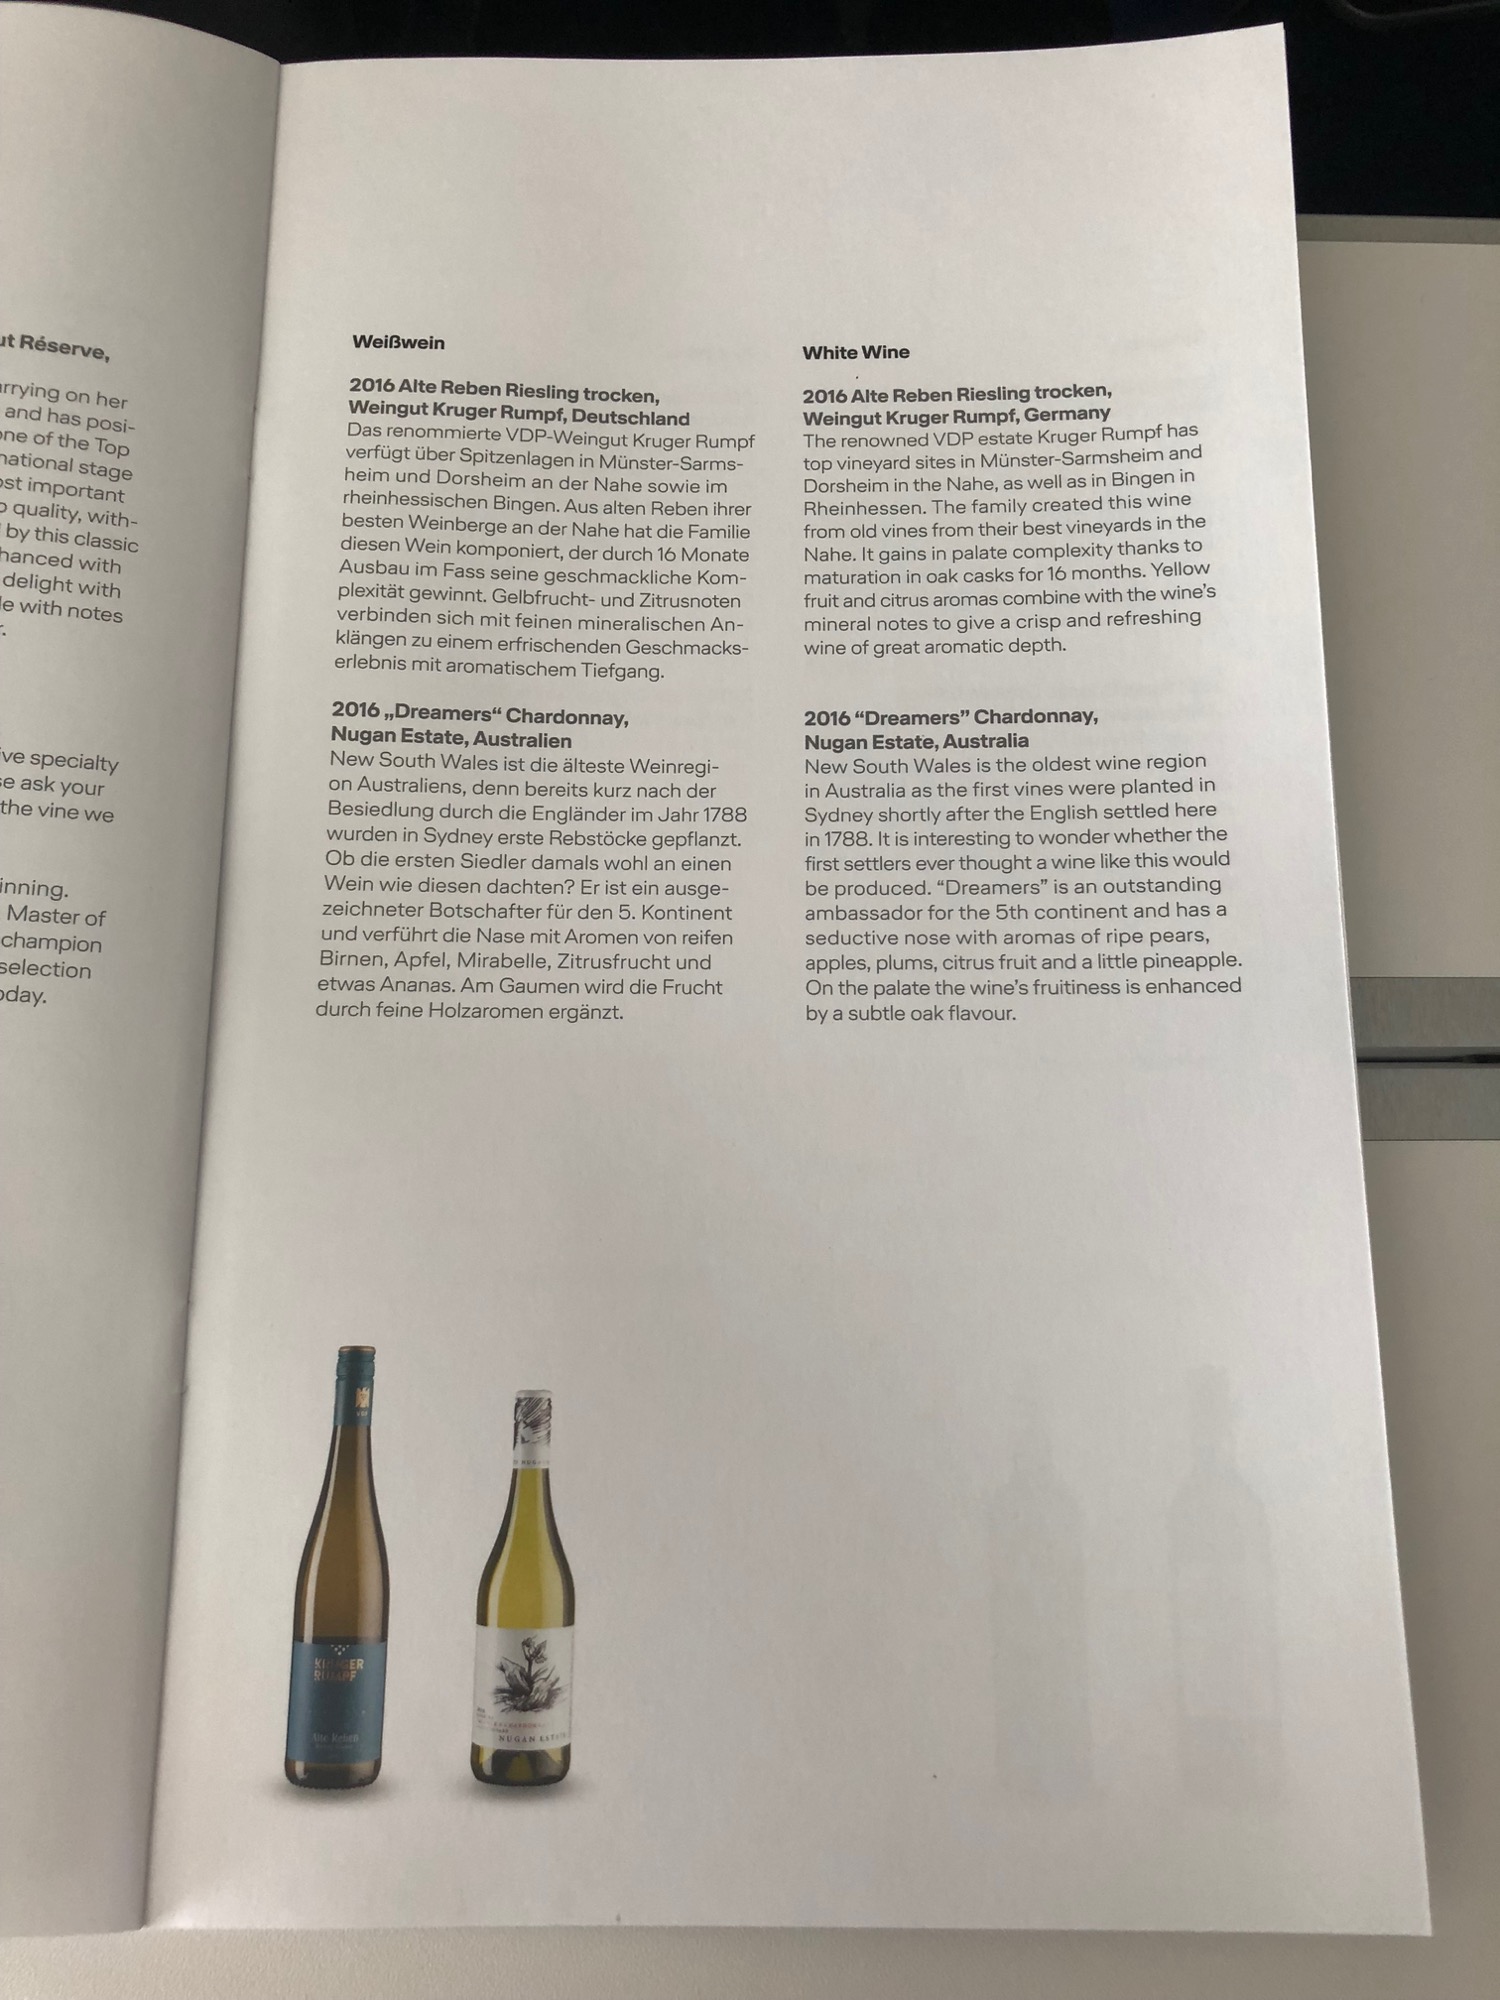 a book with text and images of wine bottles